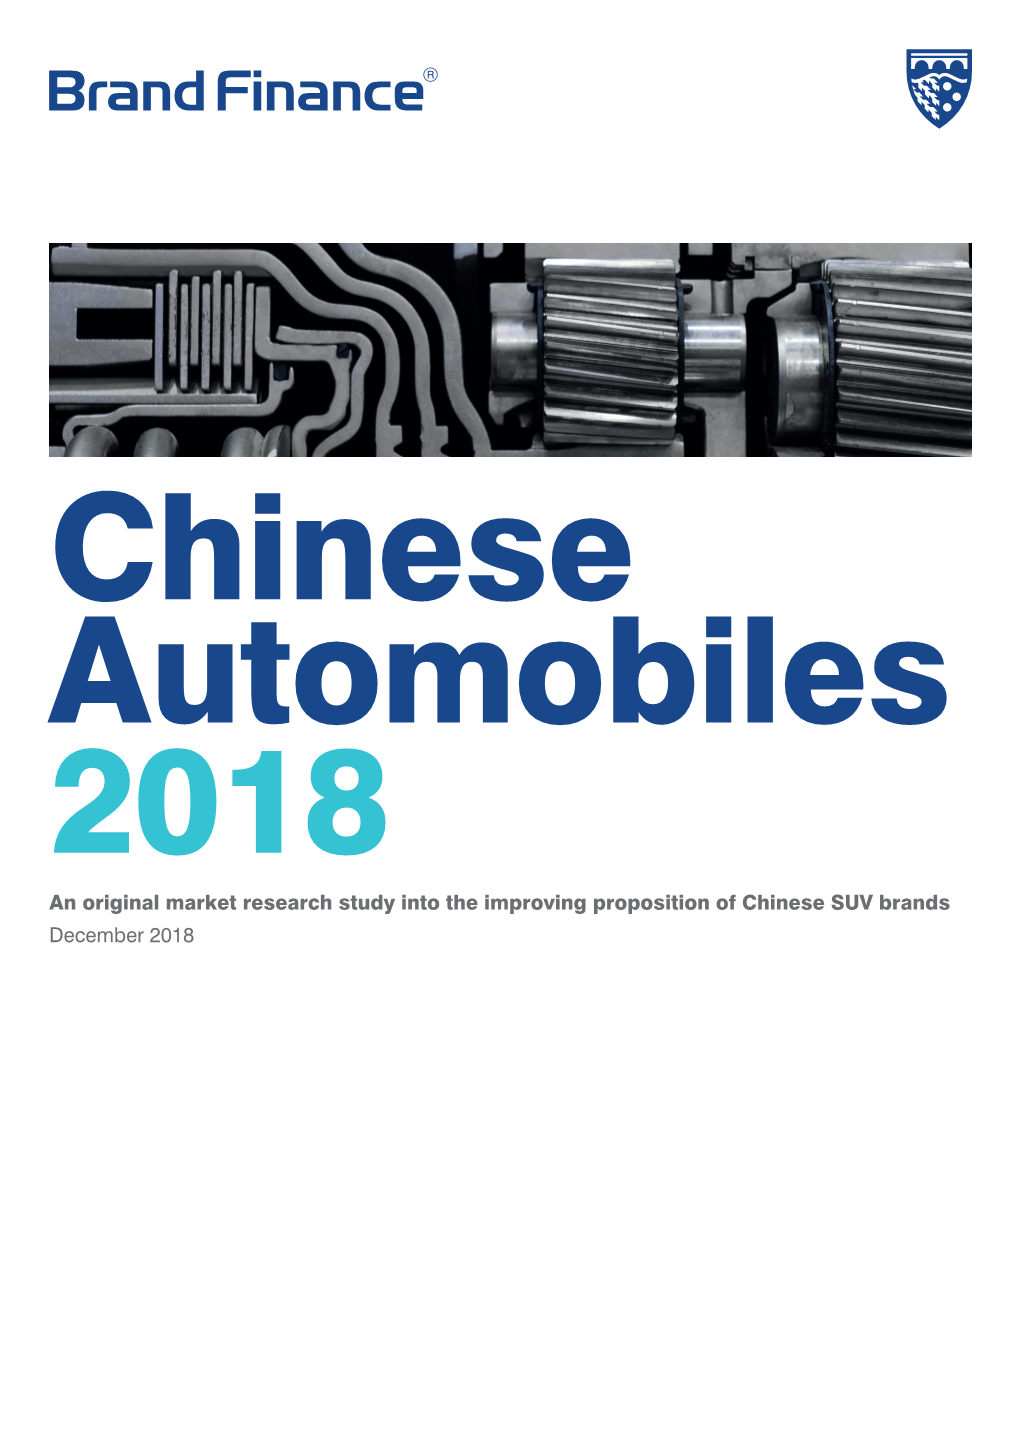 An Original Market Research Study Into the Improving Proposition of Chinese SUV Brands December 2018 Foreword